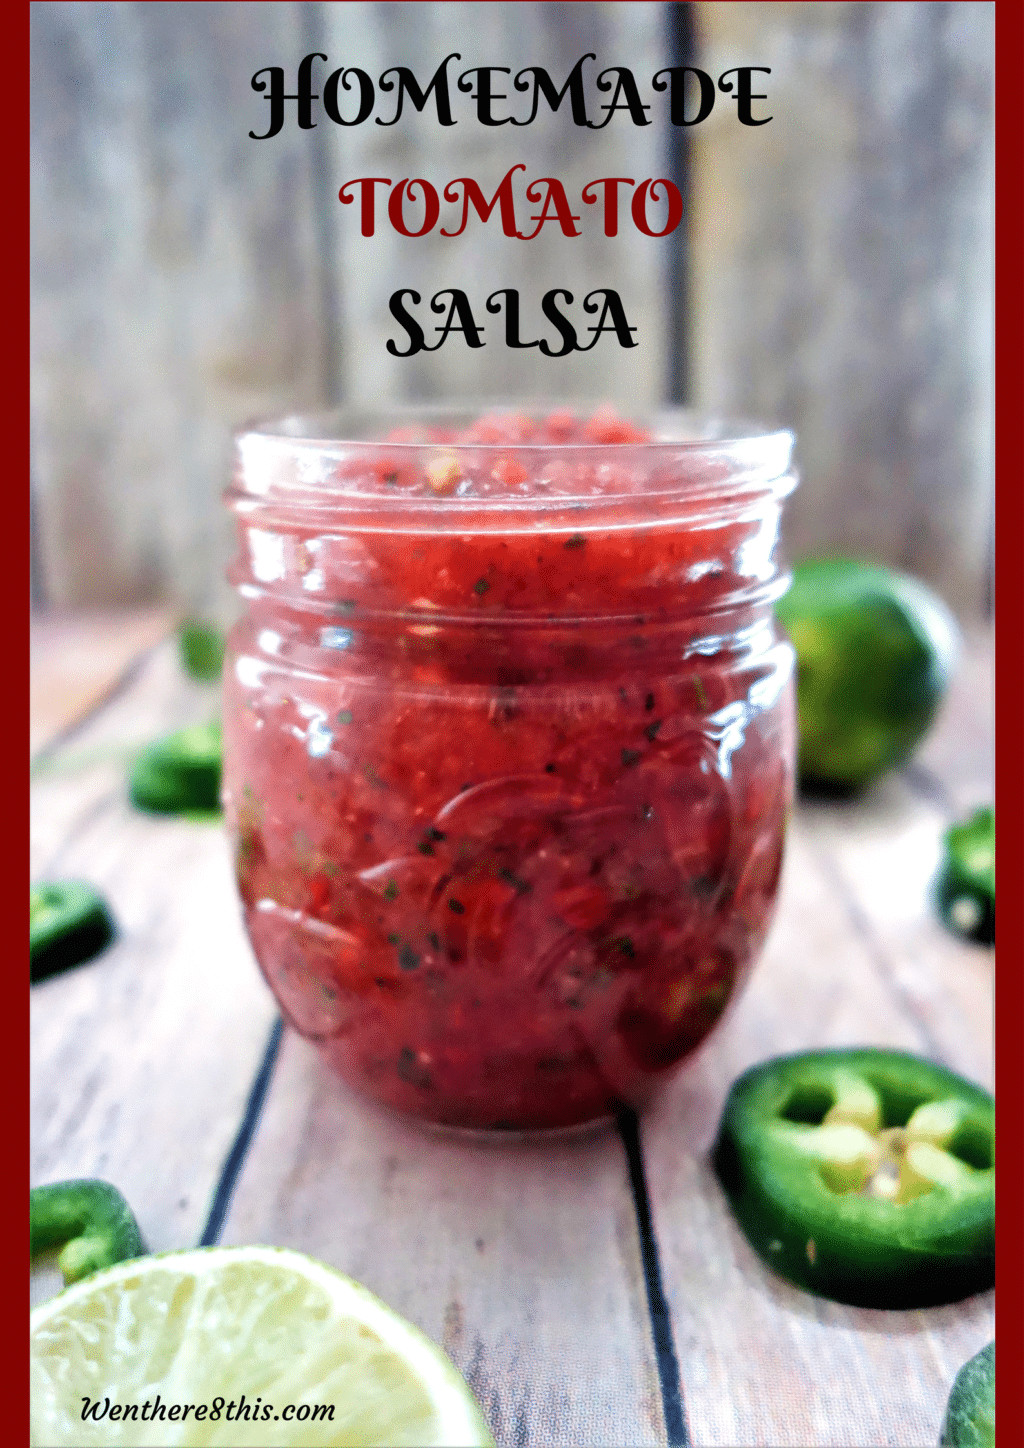 Hot Salsa Recipe For Canning
 The Best Simple Homemade Tomato Salsa 5 Minute Recipes